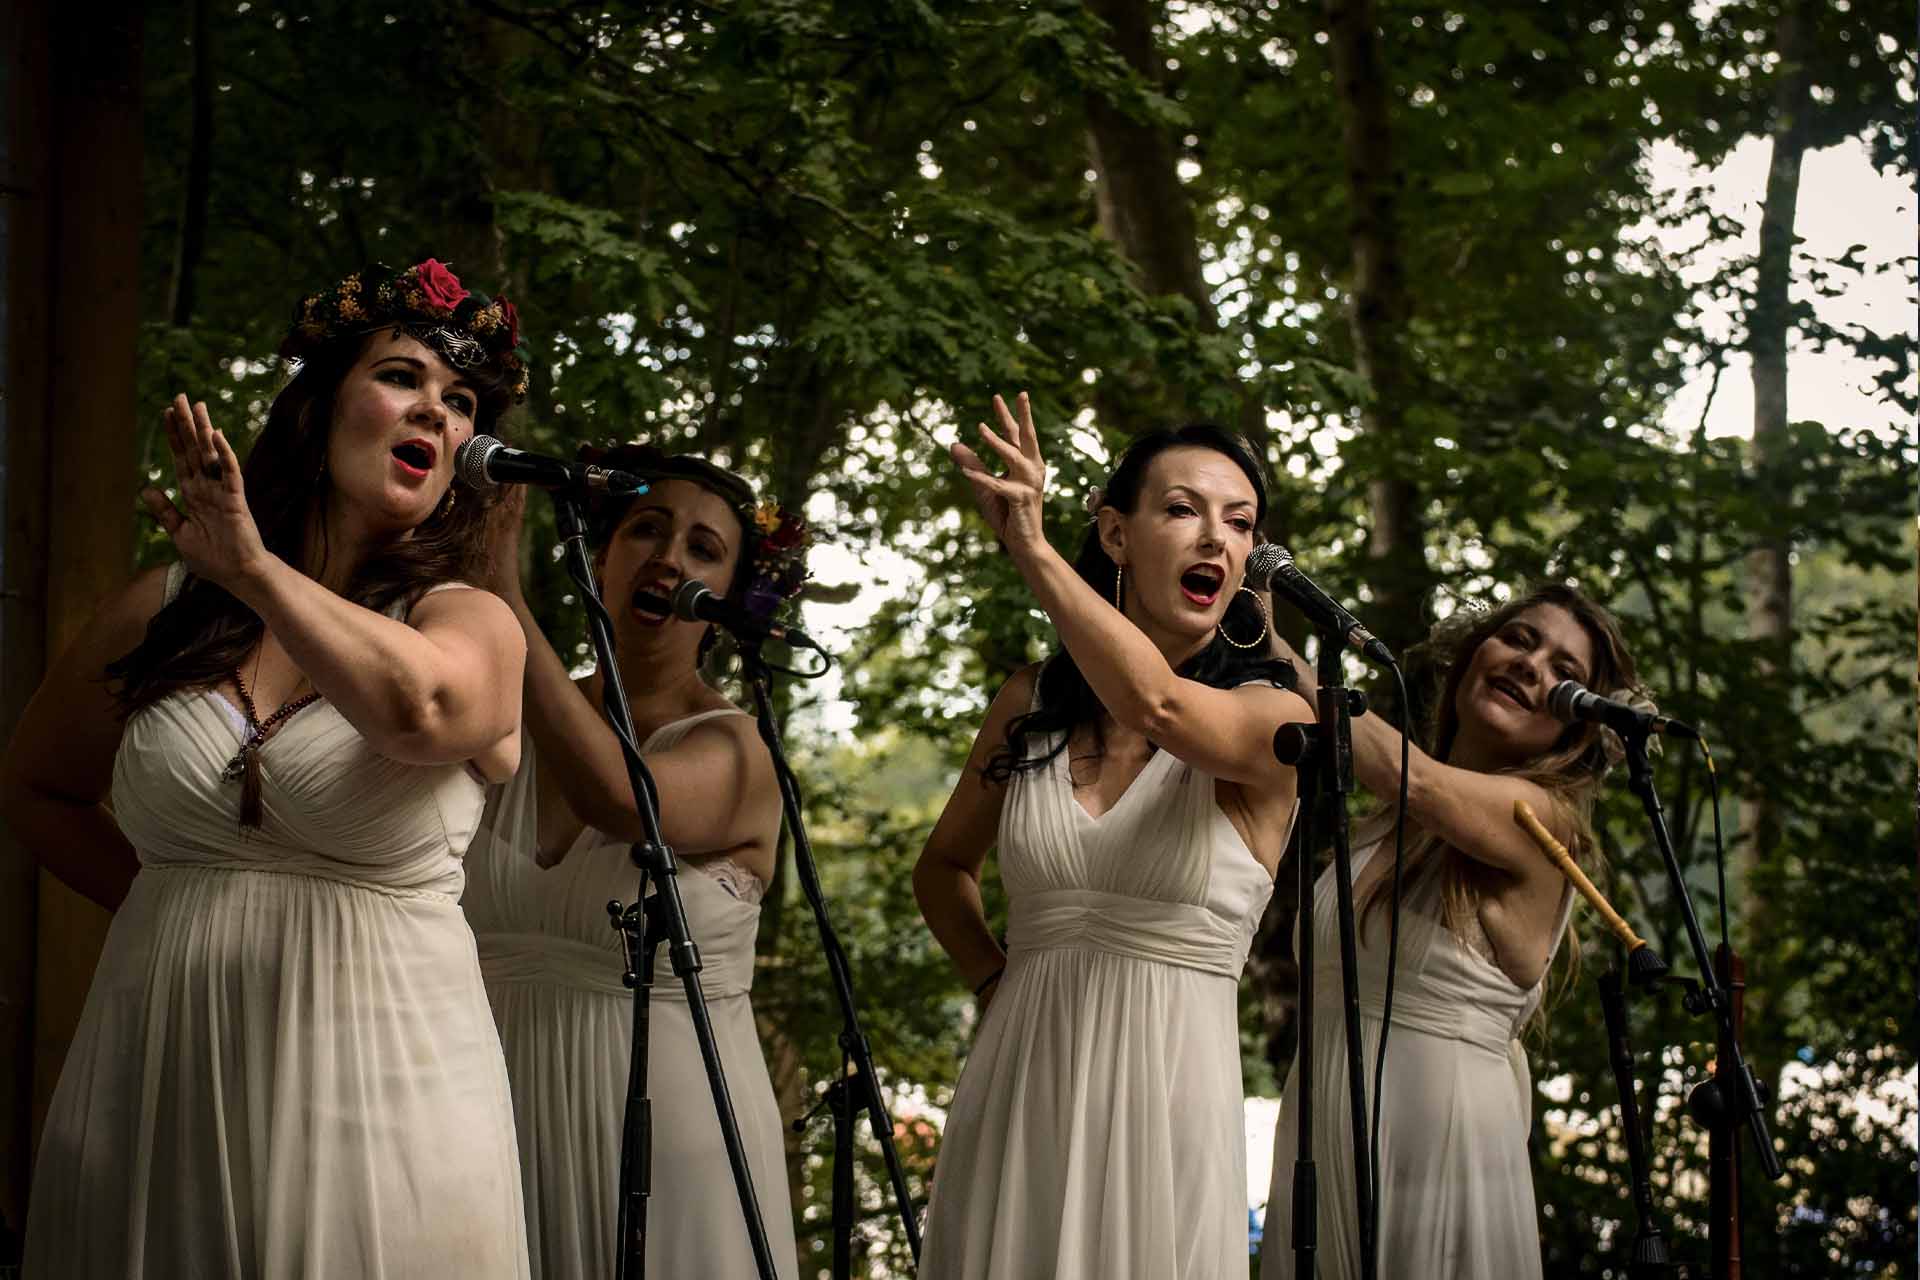 The Mediaeval Baebes perform on the Woodland Stage at the Loxwood Joust